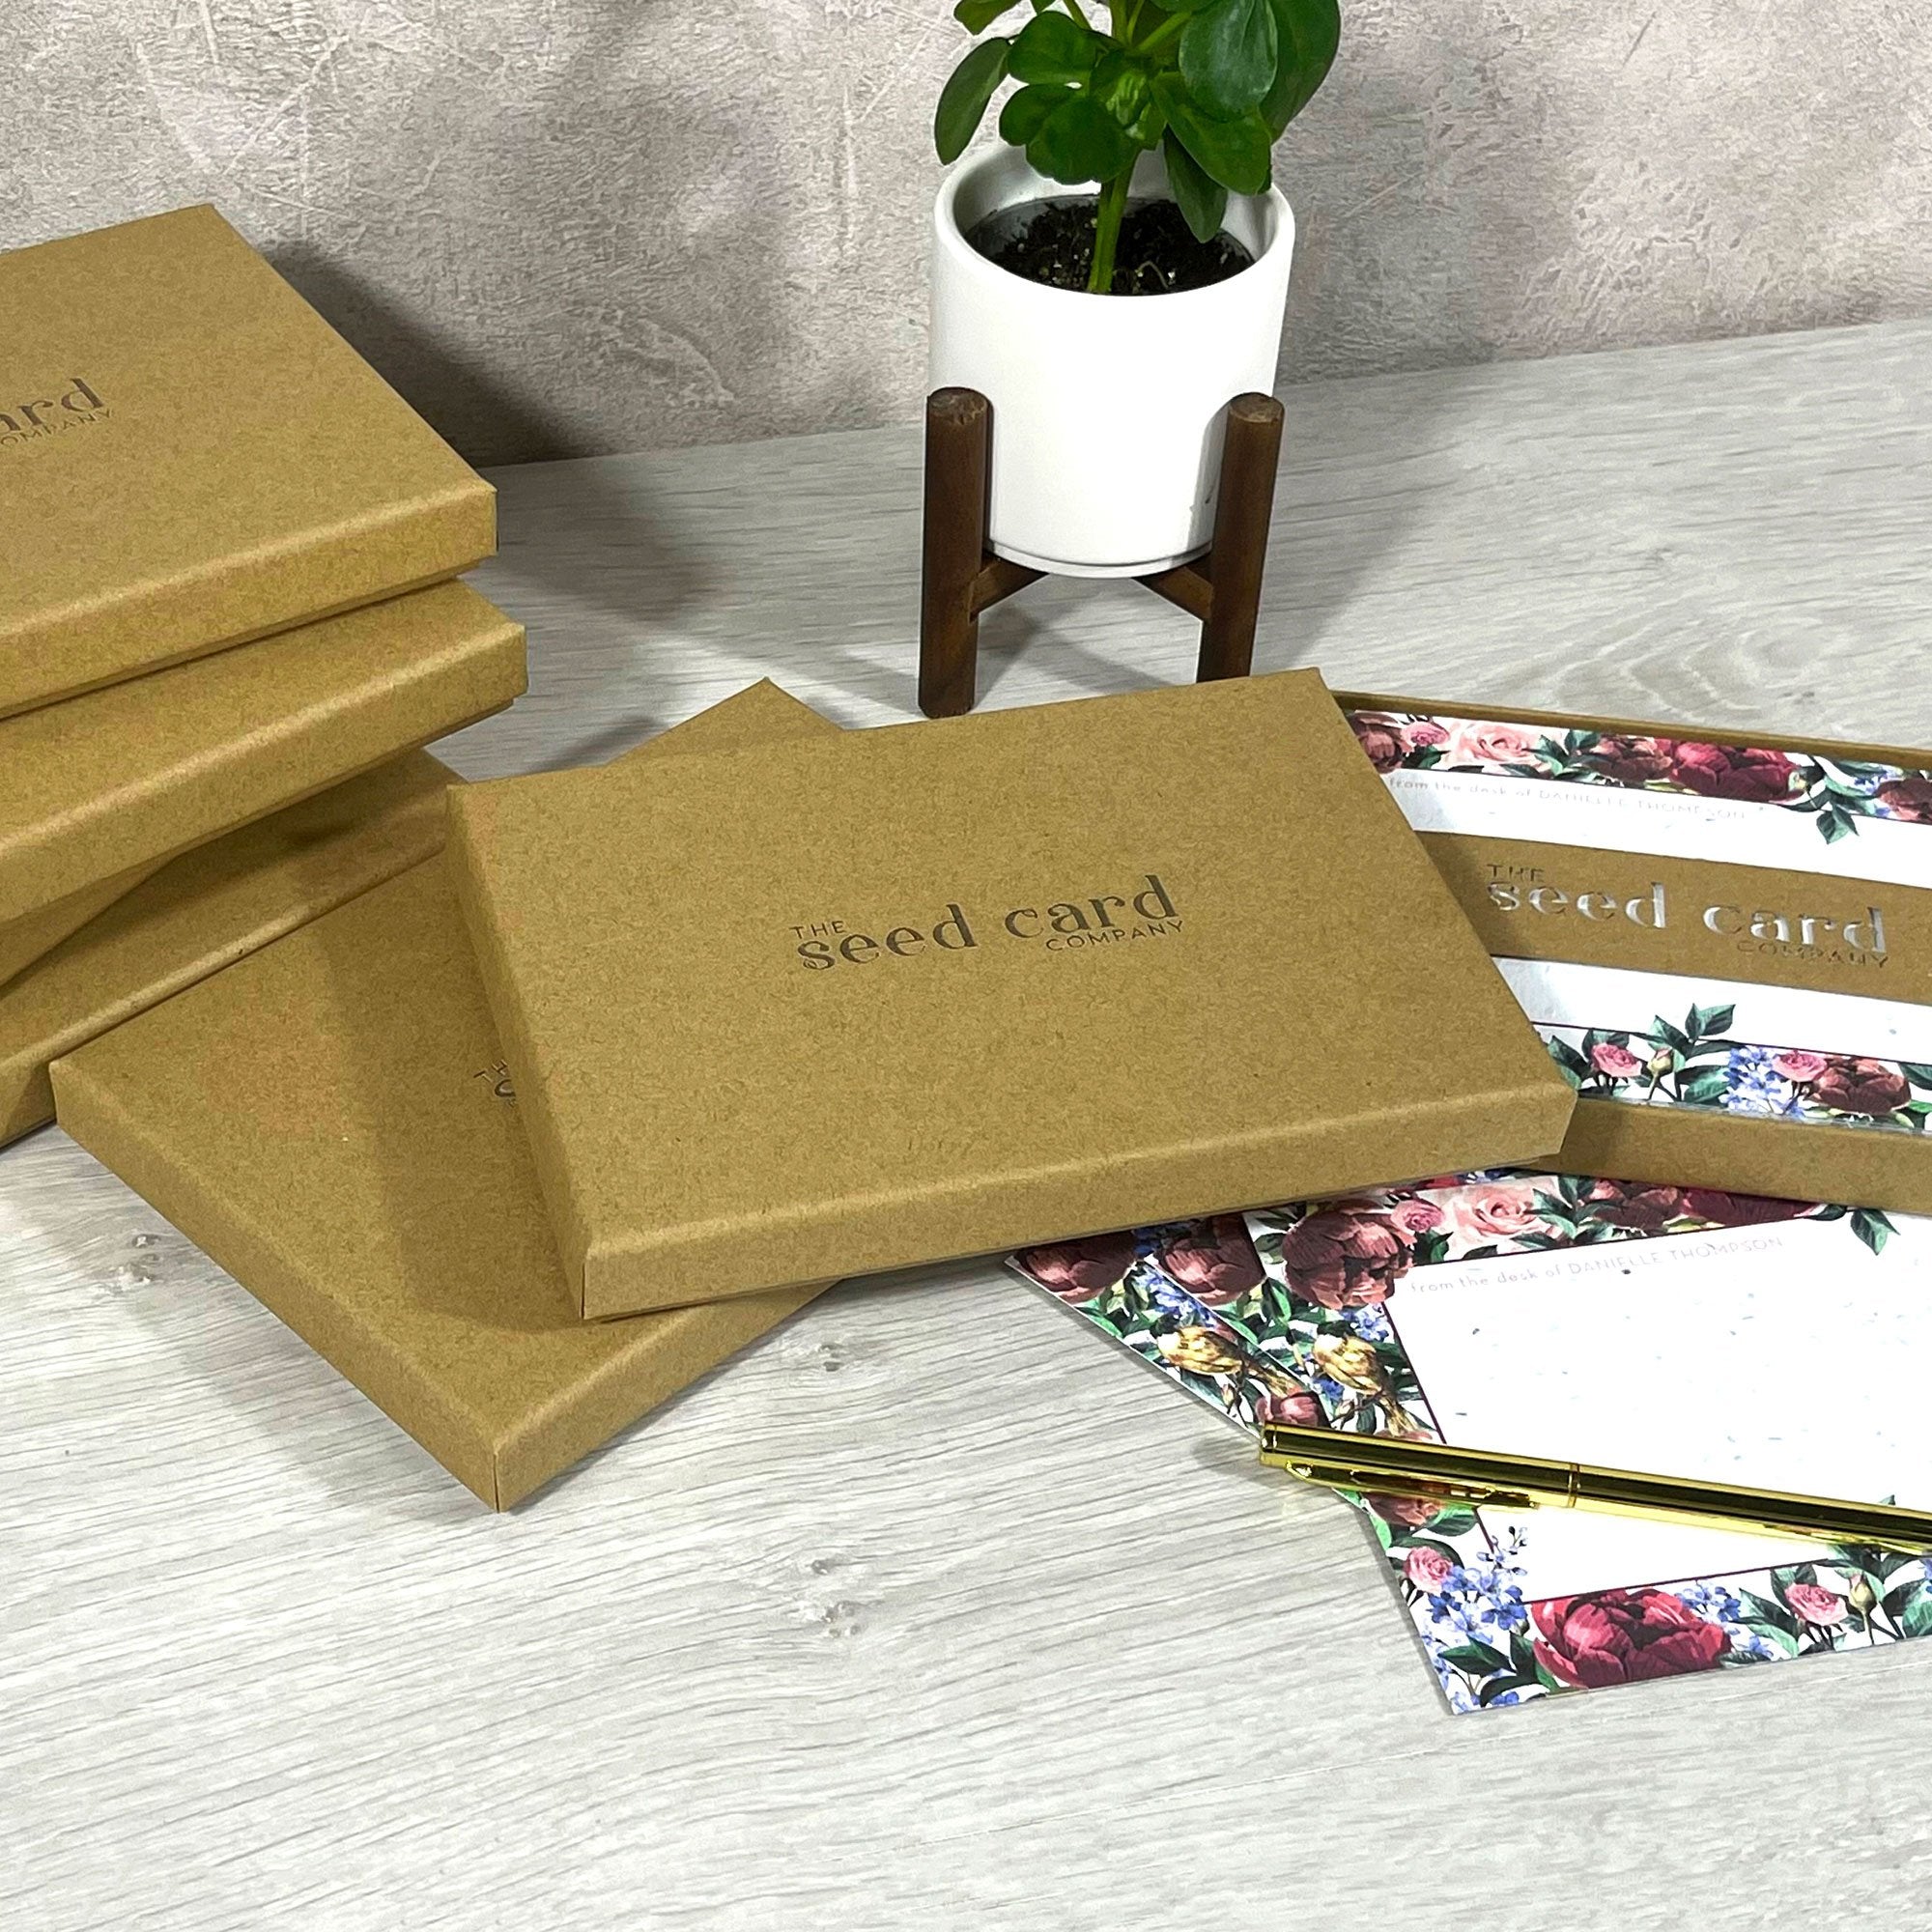 Shop online Hand Drawn Hearts - 100% biodegradable seed-embedded cards Shop -The Seed Card Company